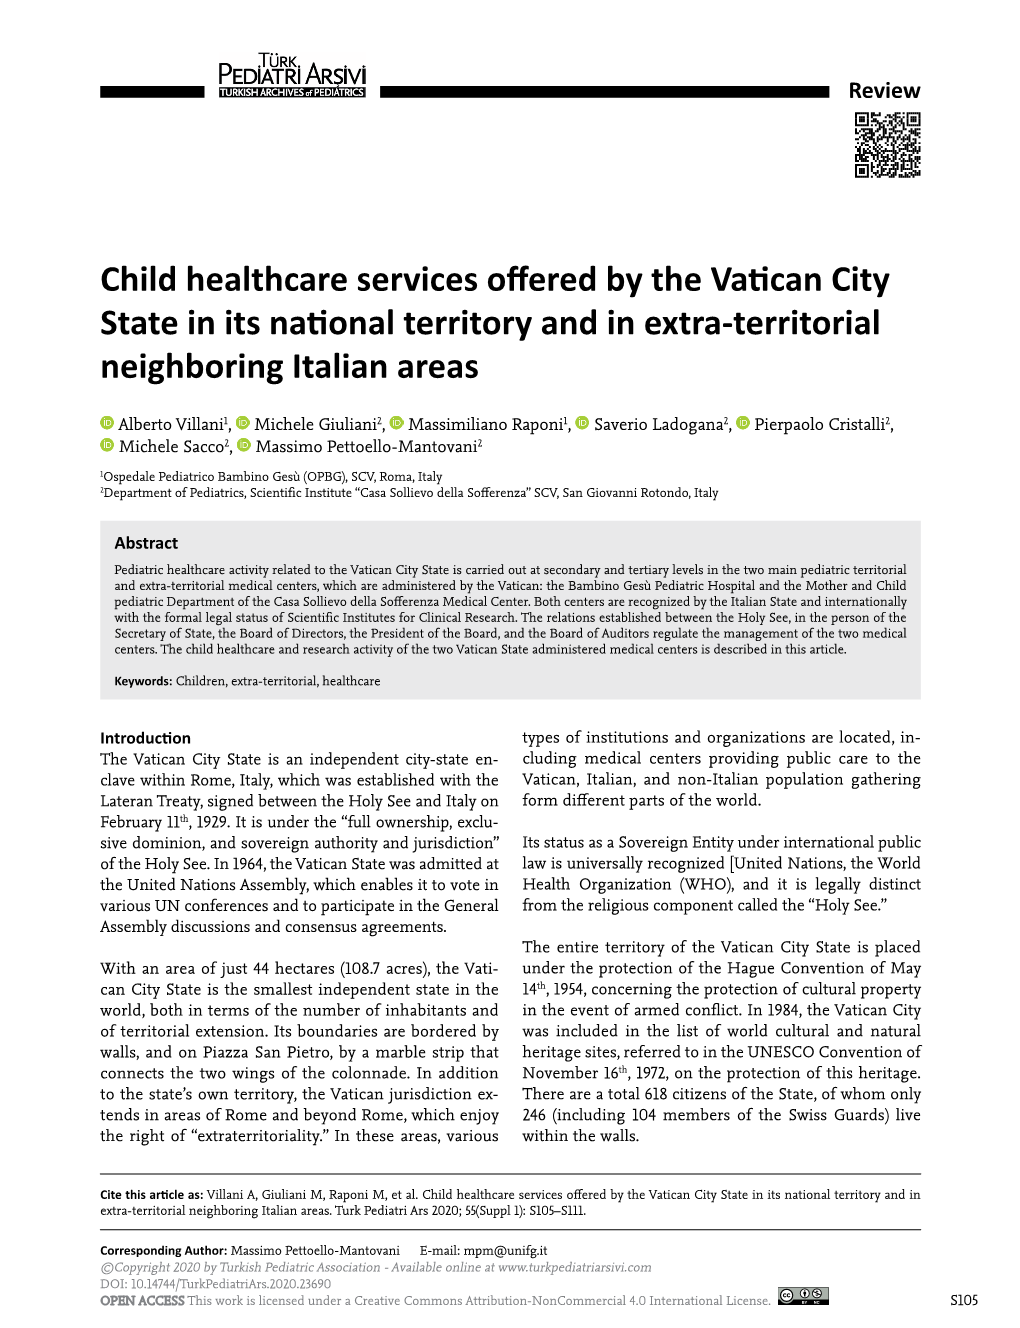 Child Healthcare Services Offered by the Vatican City State in Its National Territory and in Extra-Territorial Neighboring Italian Areas